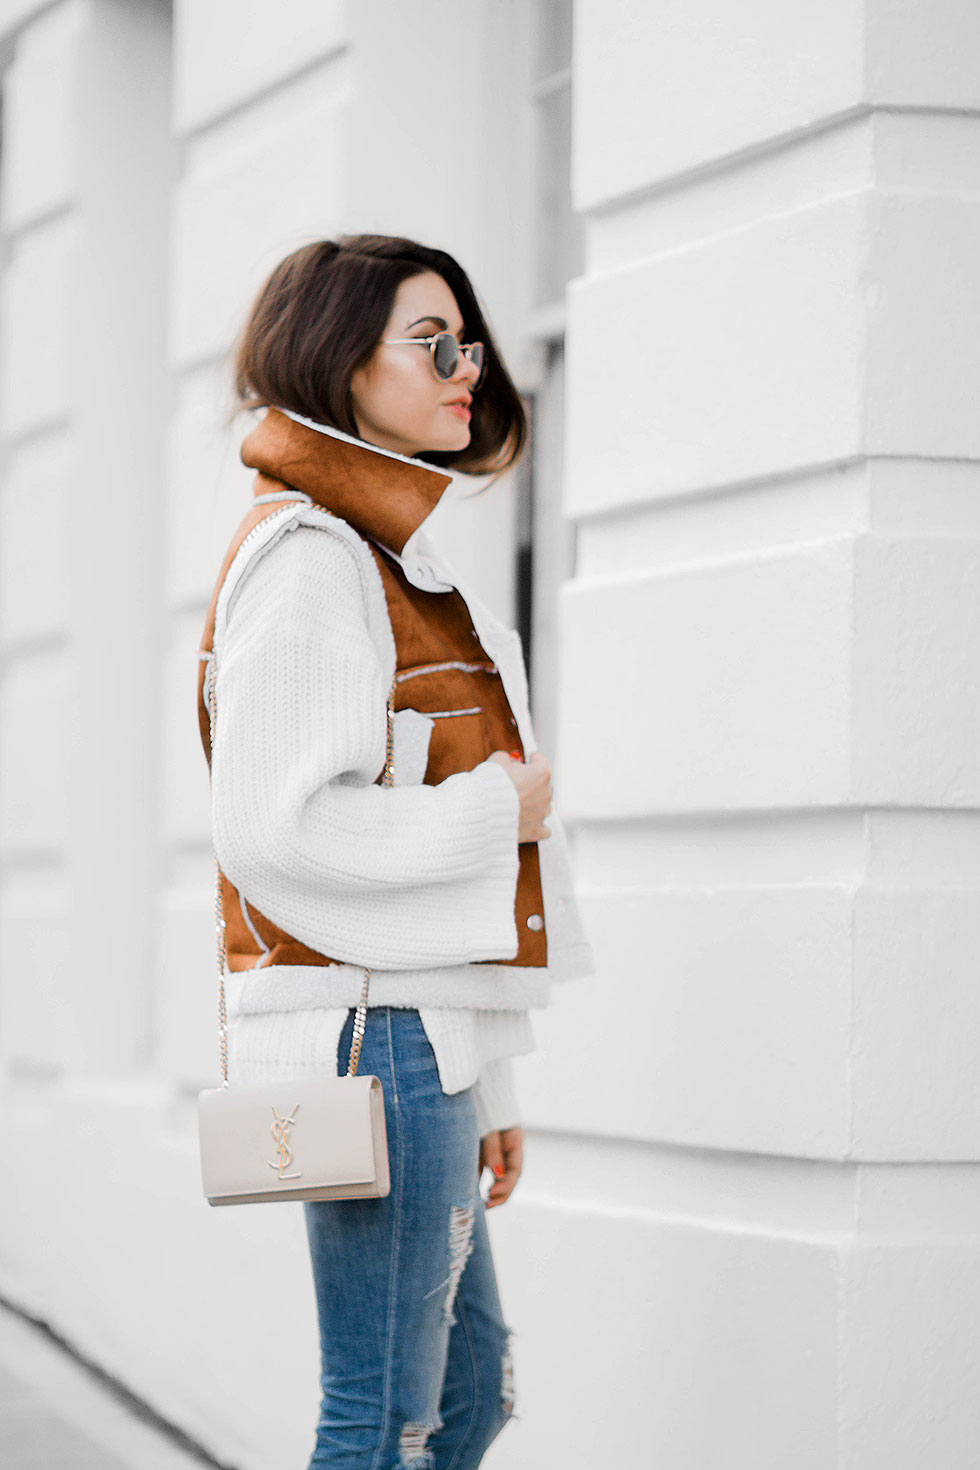 shearling vest outfit idea for winter --- featuring Rachel Zoe Jordy Turtleneck Sweater, Faux-Shearling Vest, Saint Laurent Monogramme Chain Shoulder Bag, Distressed Skinny Jeans, Ray Ban 50mm Retro Round Metal Sunglasses